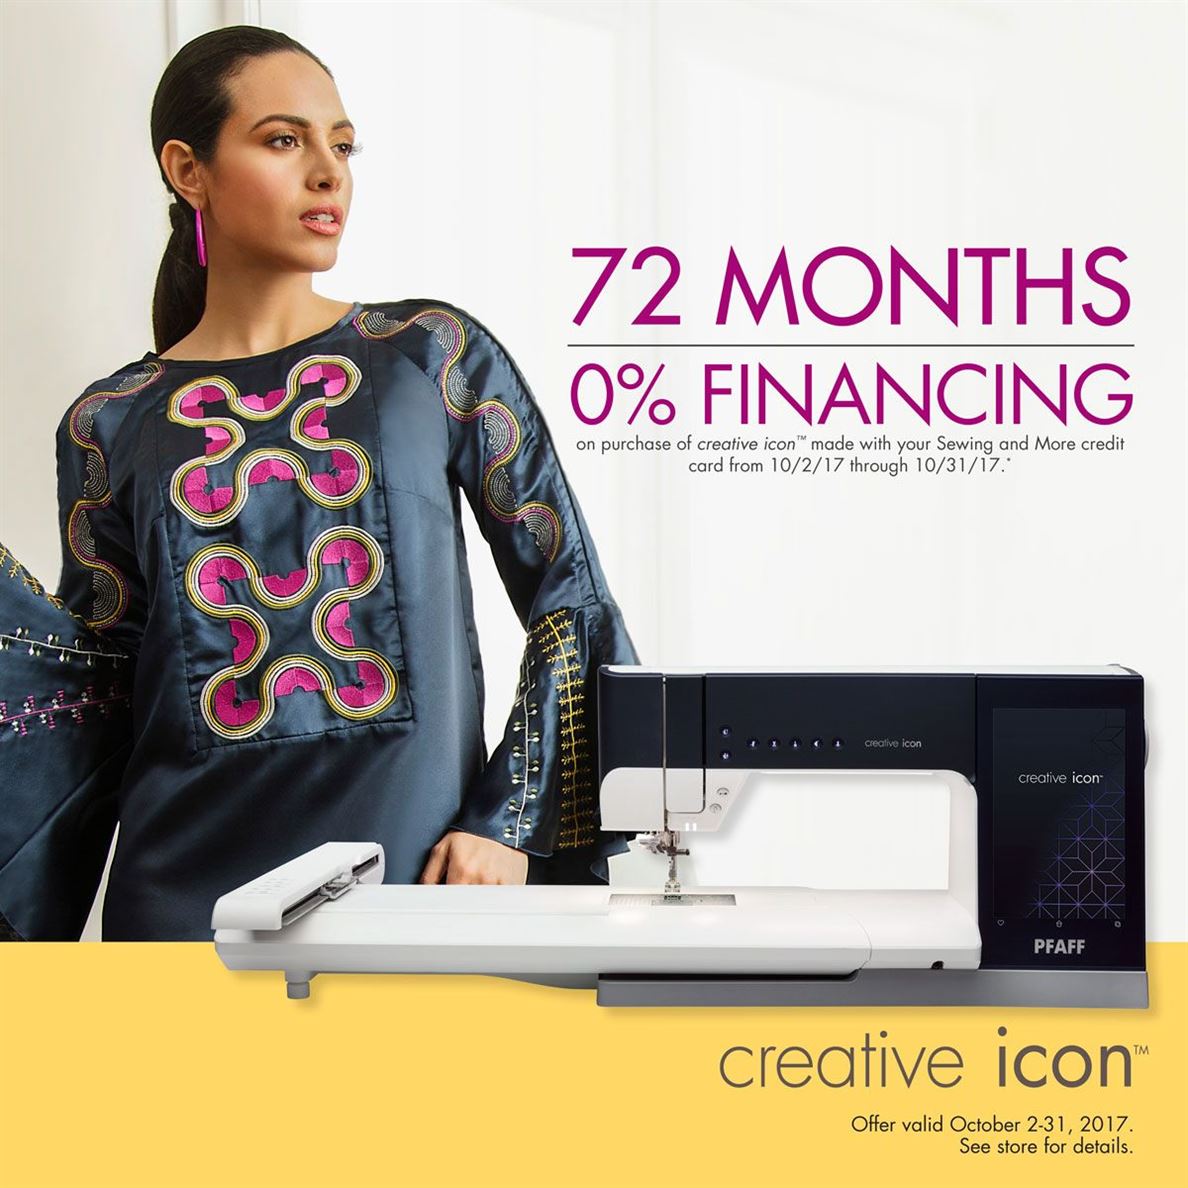 Pfaff Creative Icon: Last Chance for 72 Month Financing